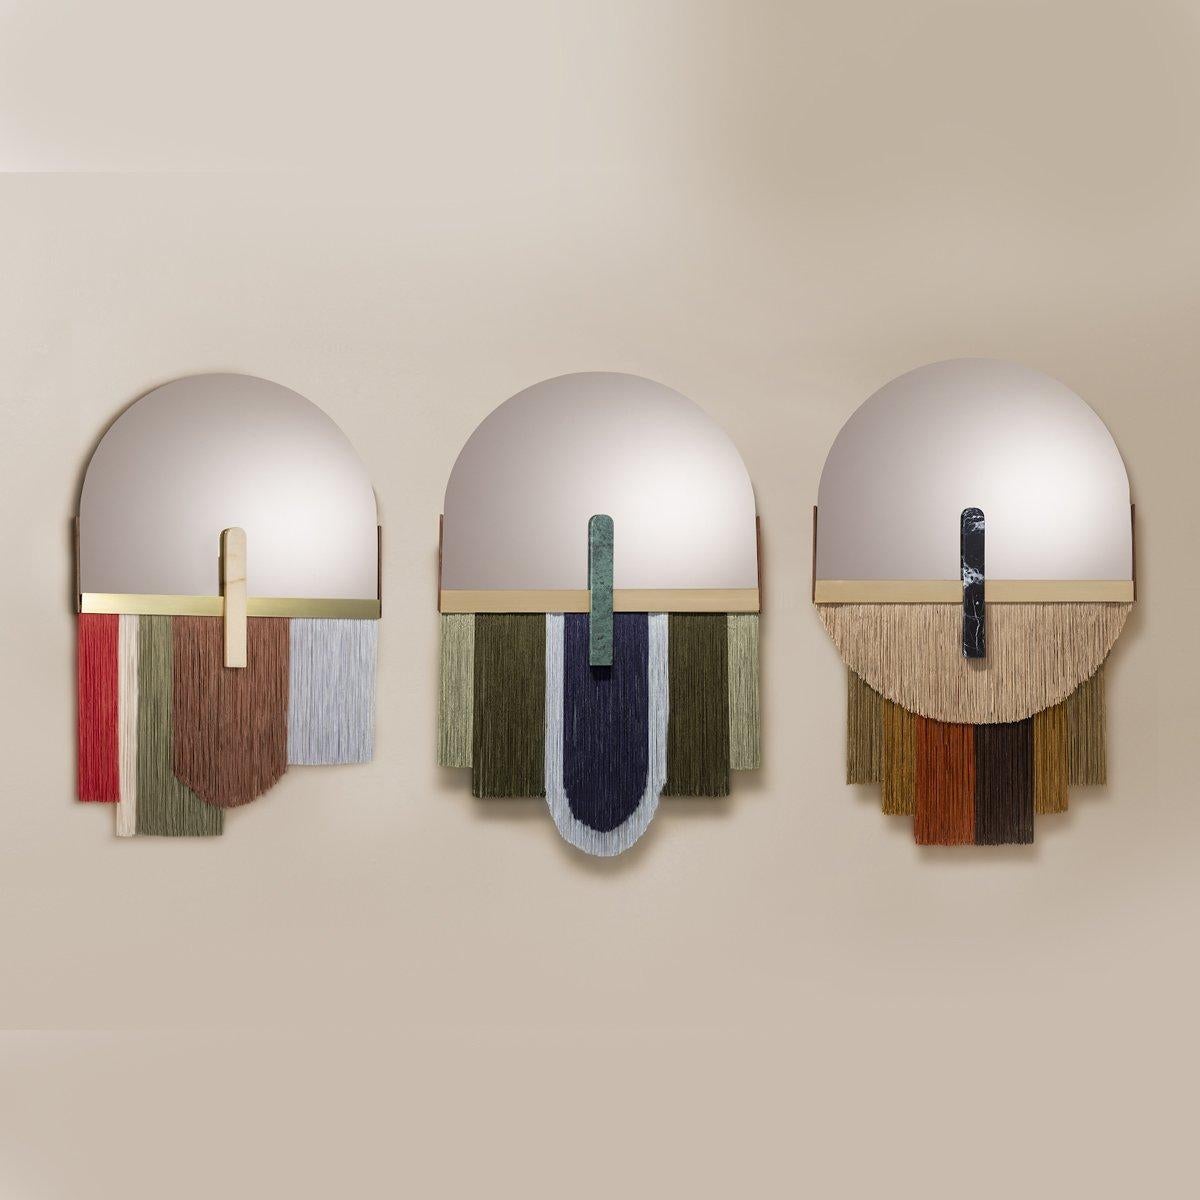 Ensemble of Three Colorful Wall Mirrors by Dooq For Sale 2